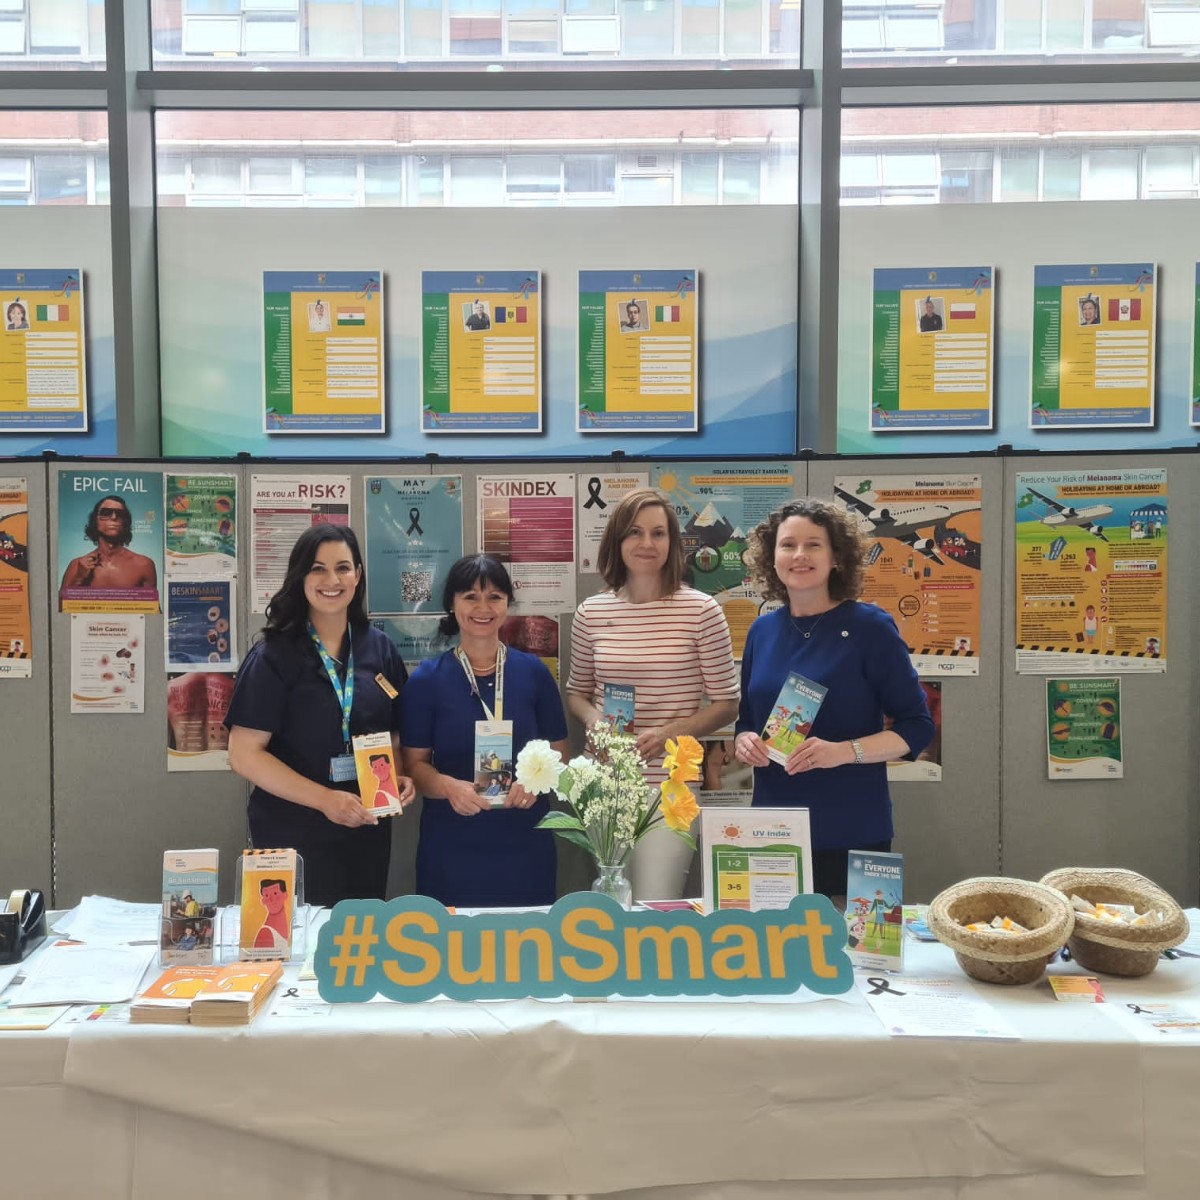 It was great to have the Mater Hospital Staff running their #SunSmart awareness information stand yesterday along side the Irish Skin Foundation and our Mater Hospital Daffodil Centre staff!